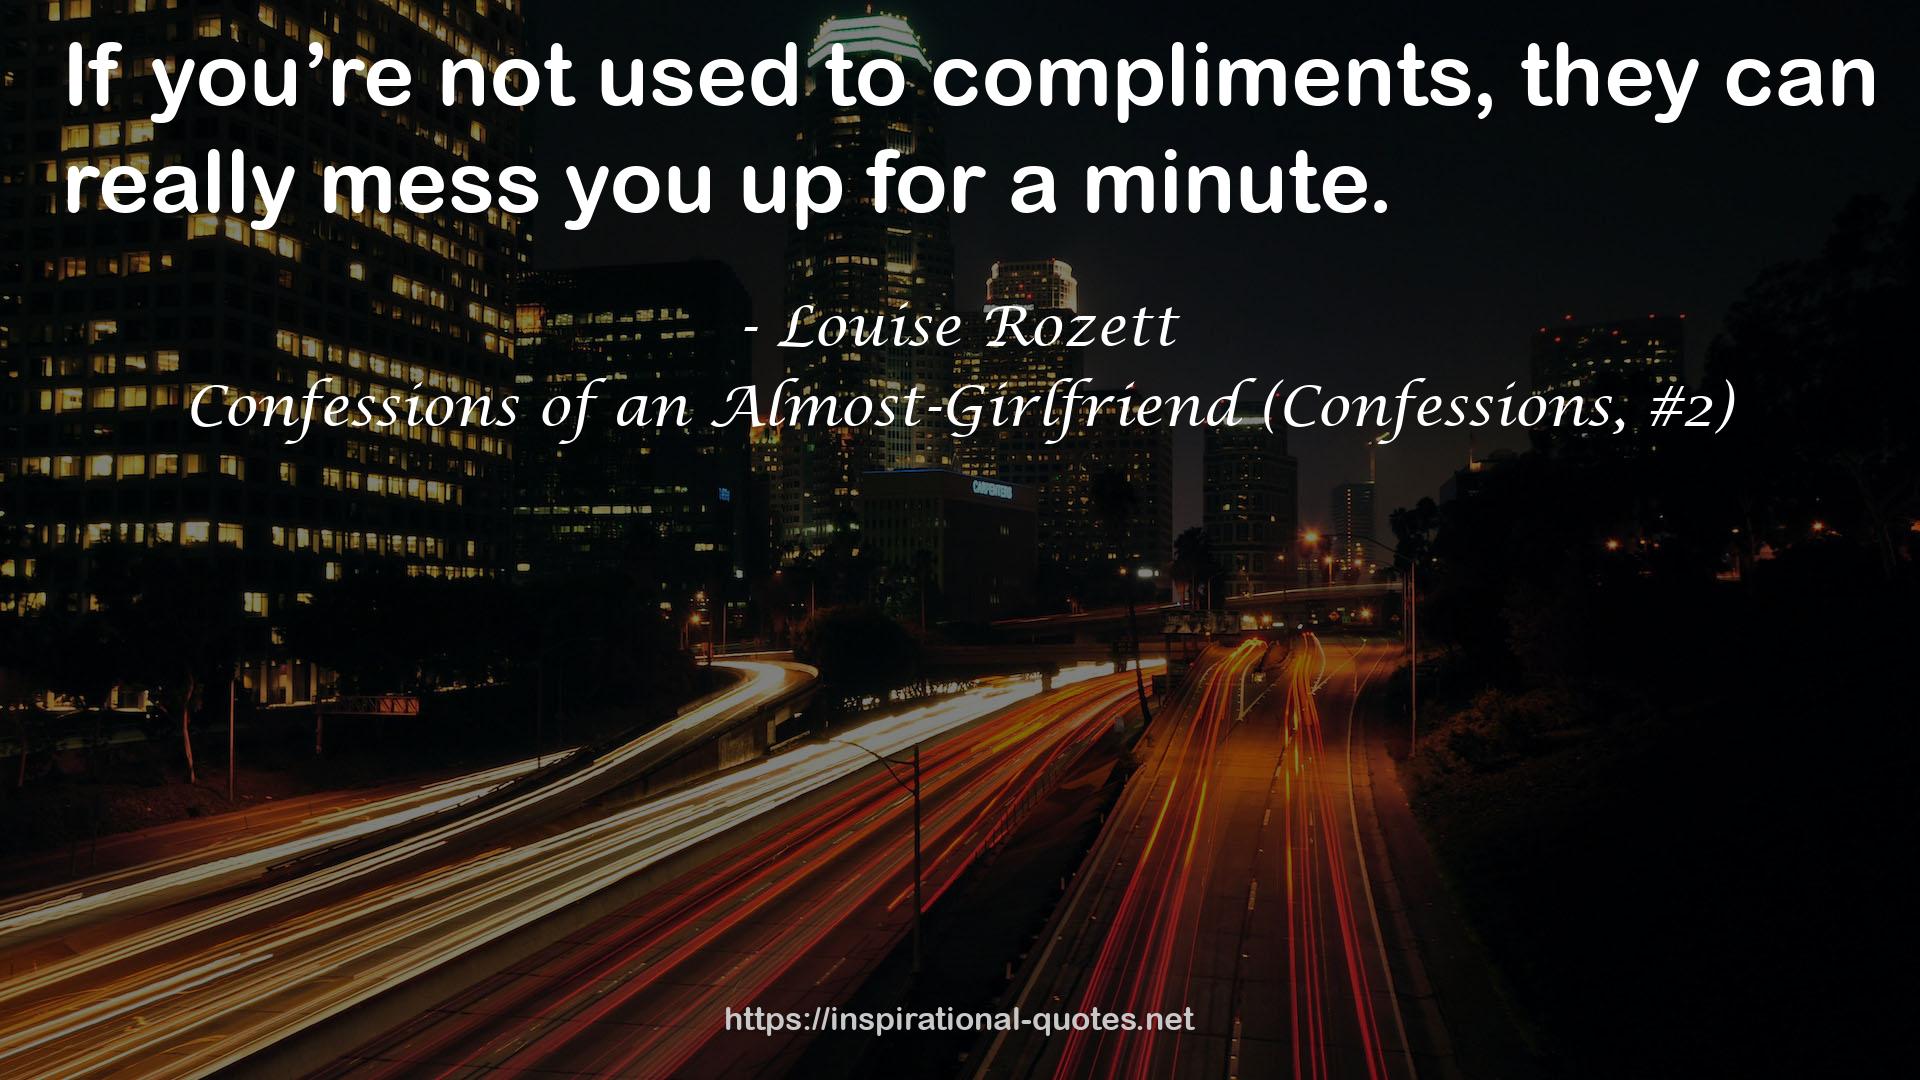 Confessions of an Almost-Girlfriend (Confessions, #2) QUOTES